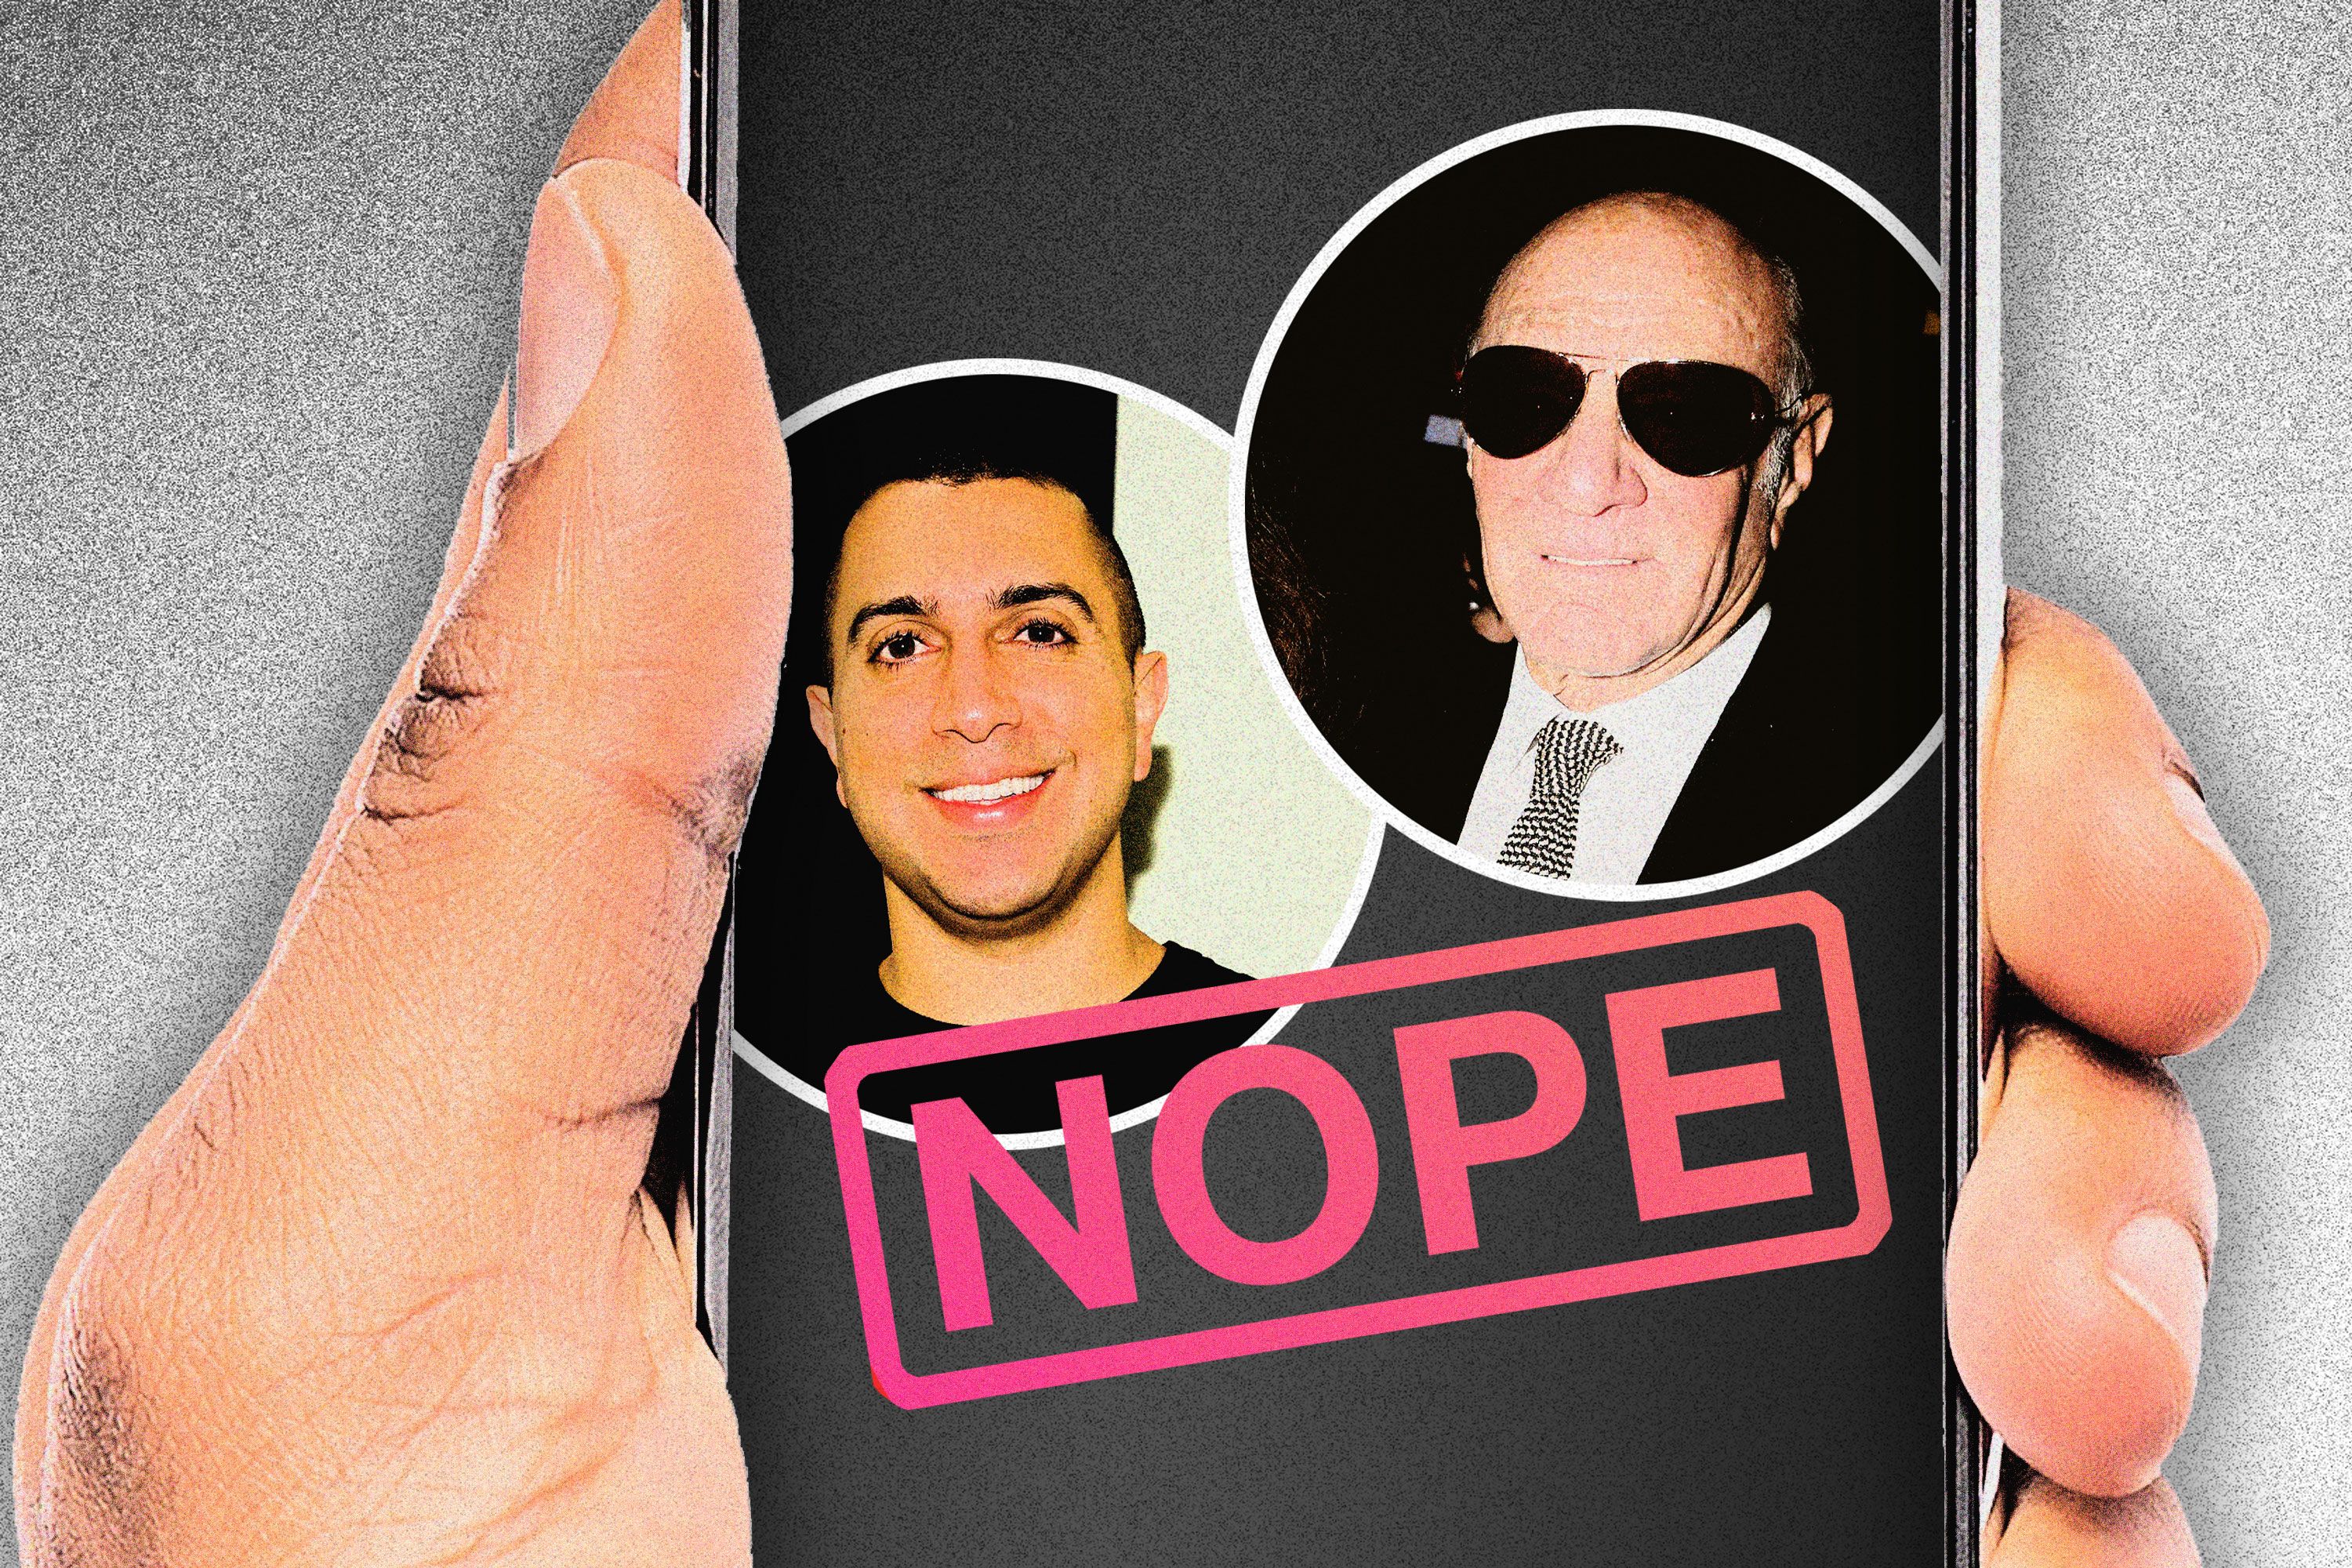 The Tinder Revenge Story Between Sean Rad and Barry Diller